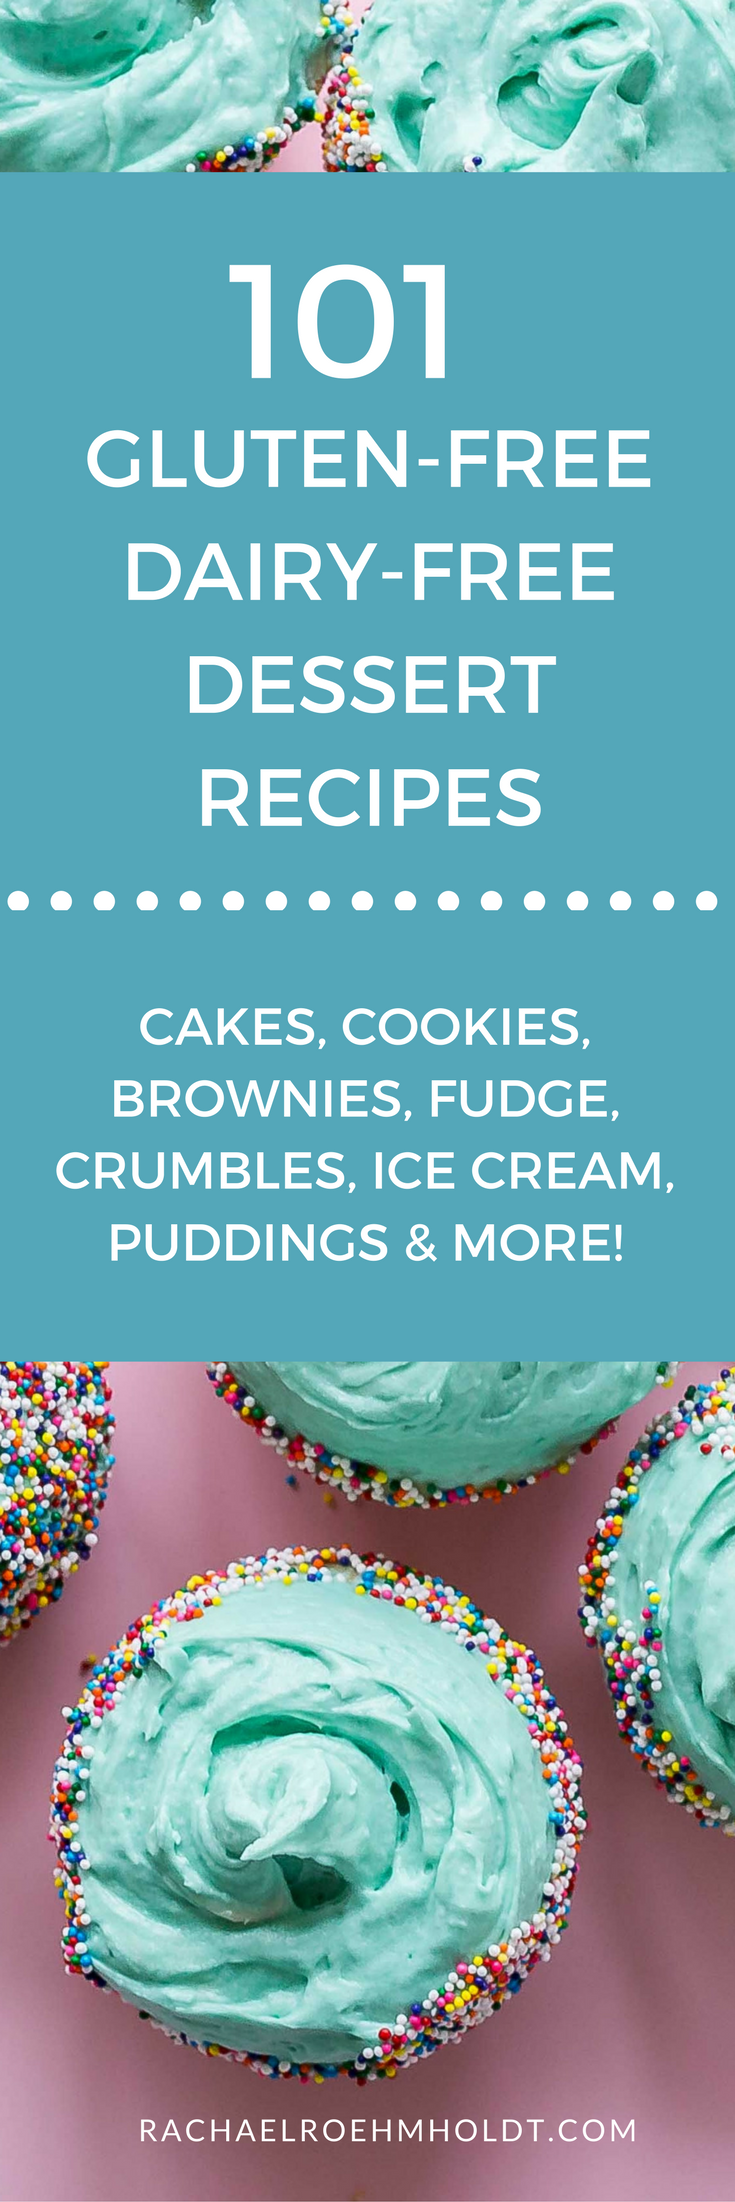 101 Gluten-free Dairy-free Dessert Recipes. Included in this recipe roundup are: gluten-free dairy-free cake recipes, chocolate dessert recipes, fruit dessert recipes, lemon dessert recipes, peanut butter dessert recipes, cookie recipes, brownie recipes, healthy dessert recipes, no sugar dessert recipes, and easy recipes. Click through to find tons of recipe inspiration and get access to a free workshop all about going gluten-free and dairy-free.